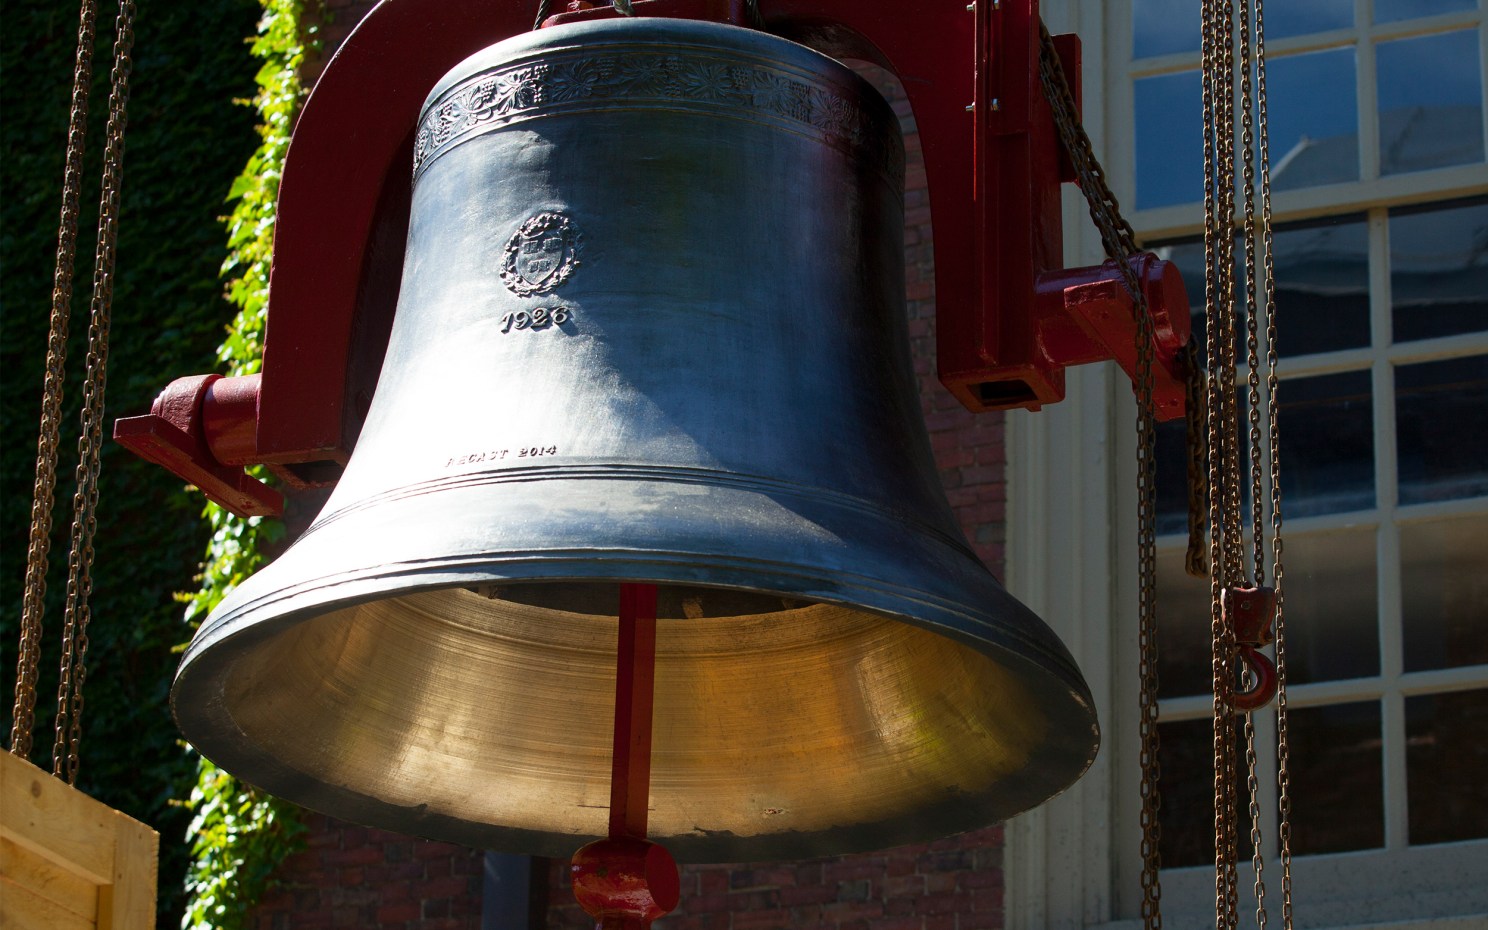 In 2014, a new bell was installed in the Memorial Church.